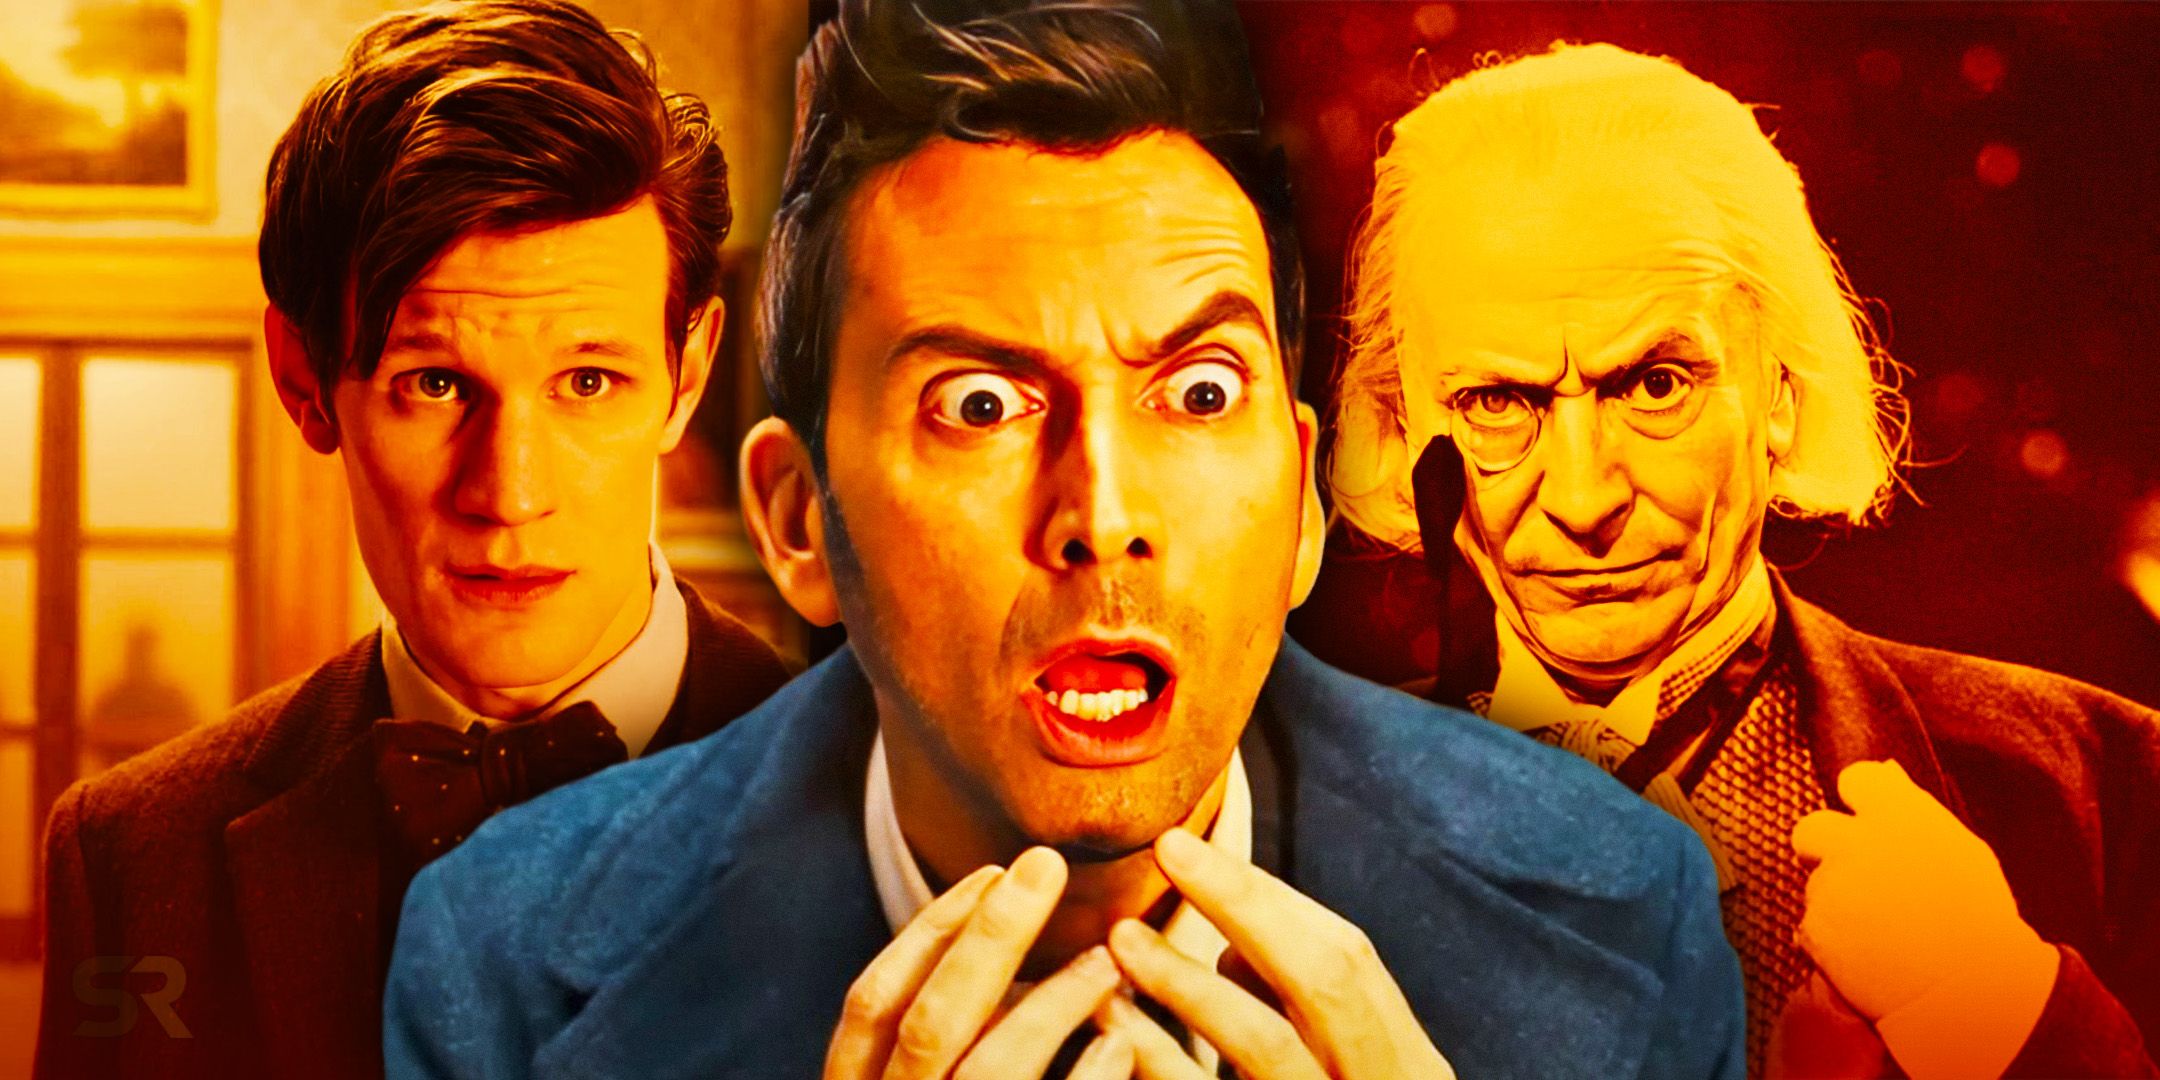 The Fourteenth Doctor looks shocked, with the Eleventh Doctor and the First Doctor behind them.